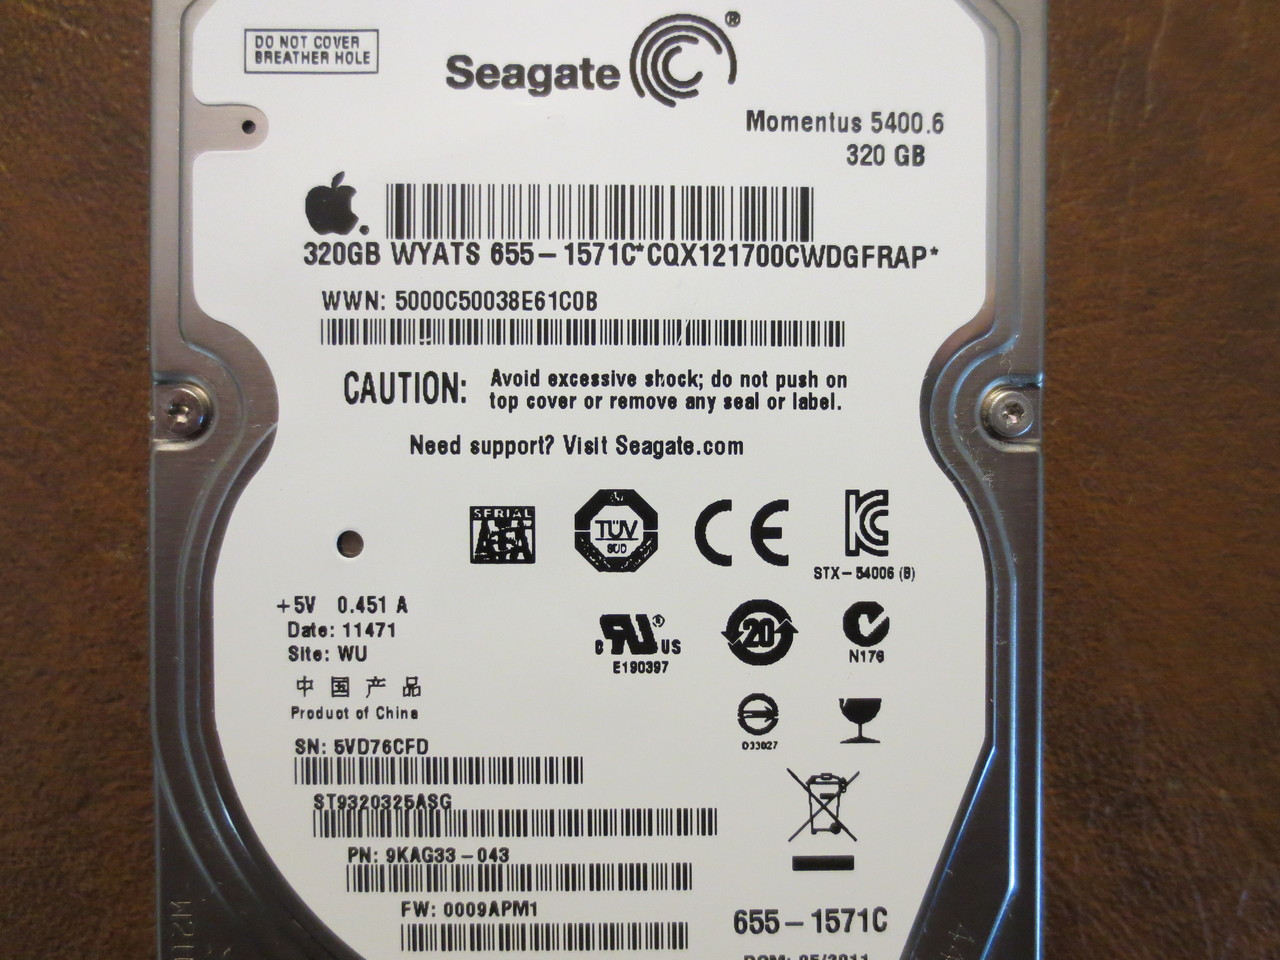 Seagate ST9320325ASG 9KAG33-043 FW:0009APM1 WU Apple#655-1571C 320gb Sata  (Donor for Parts) - Effective Electronics